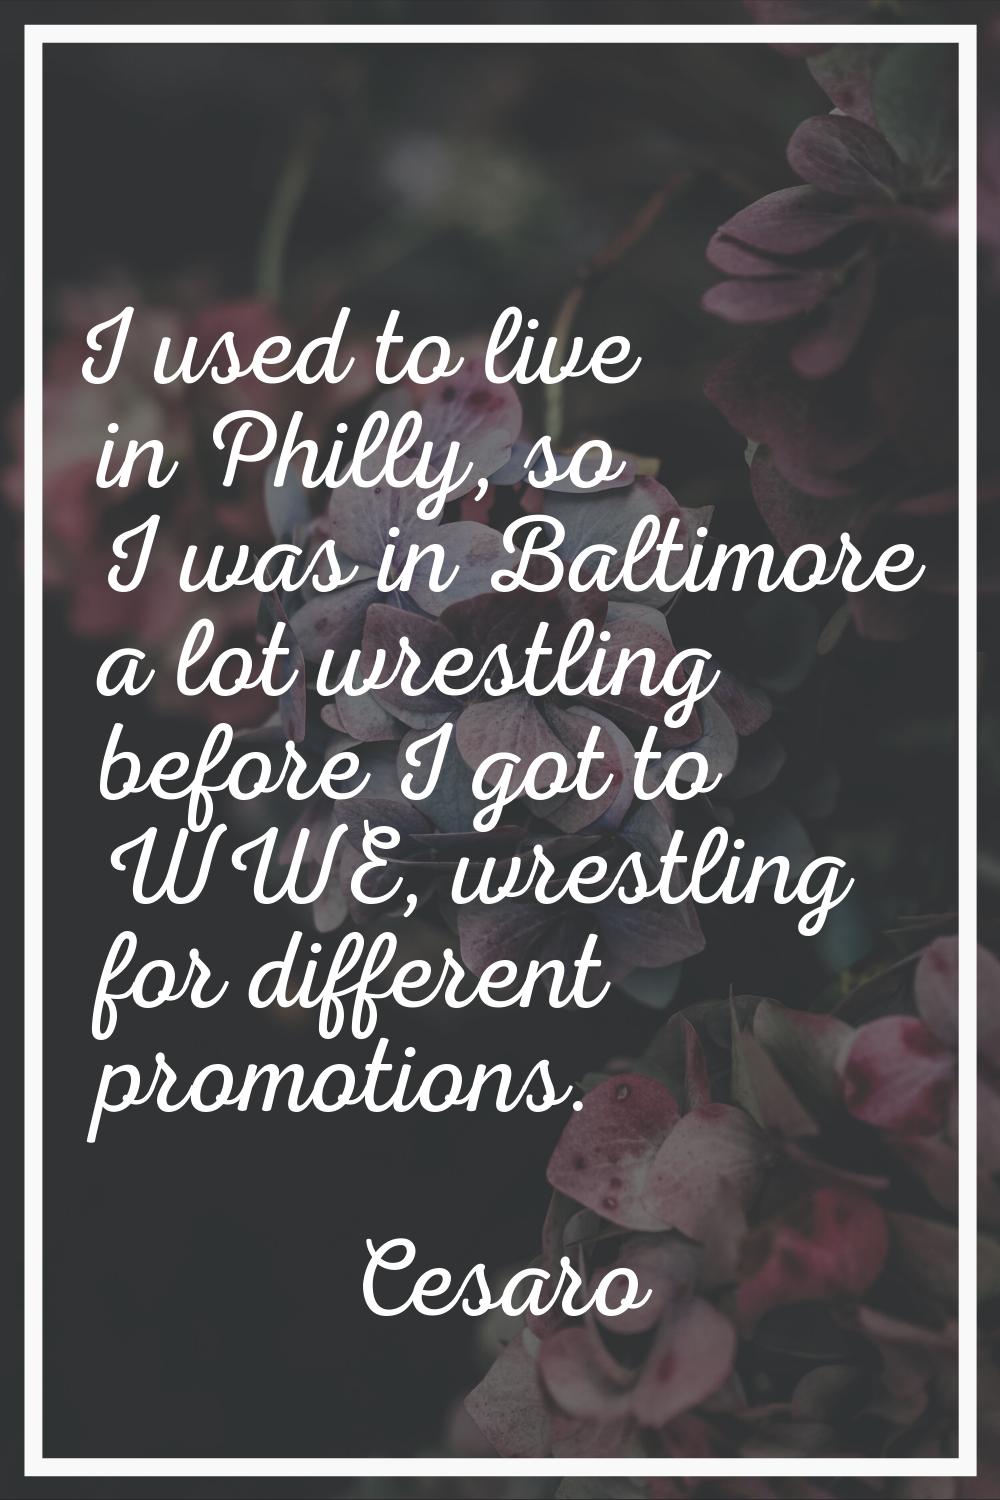 I used to live in Philly, so I was in Baltimore a lot wrestling before I got to WWE, wrestling for 